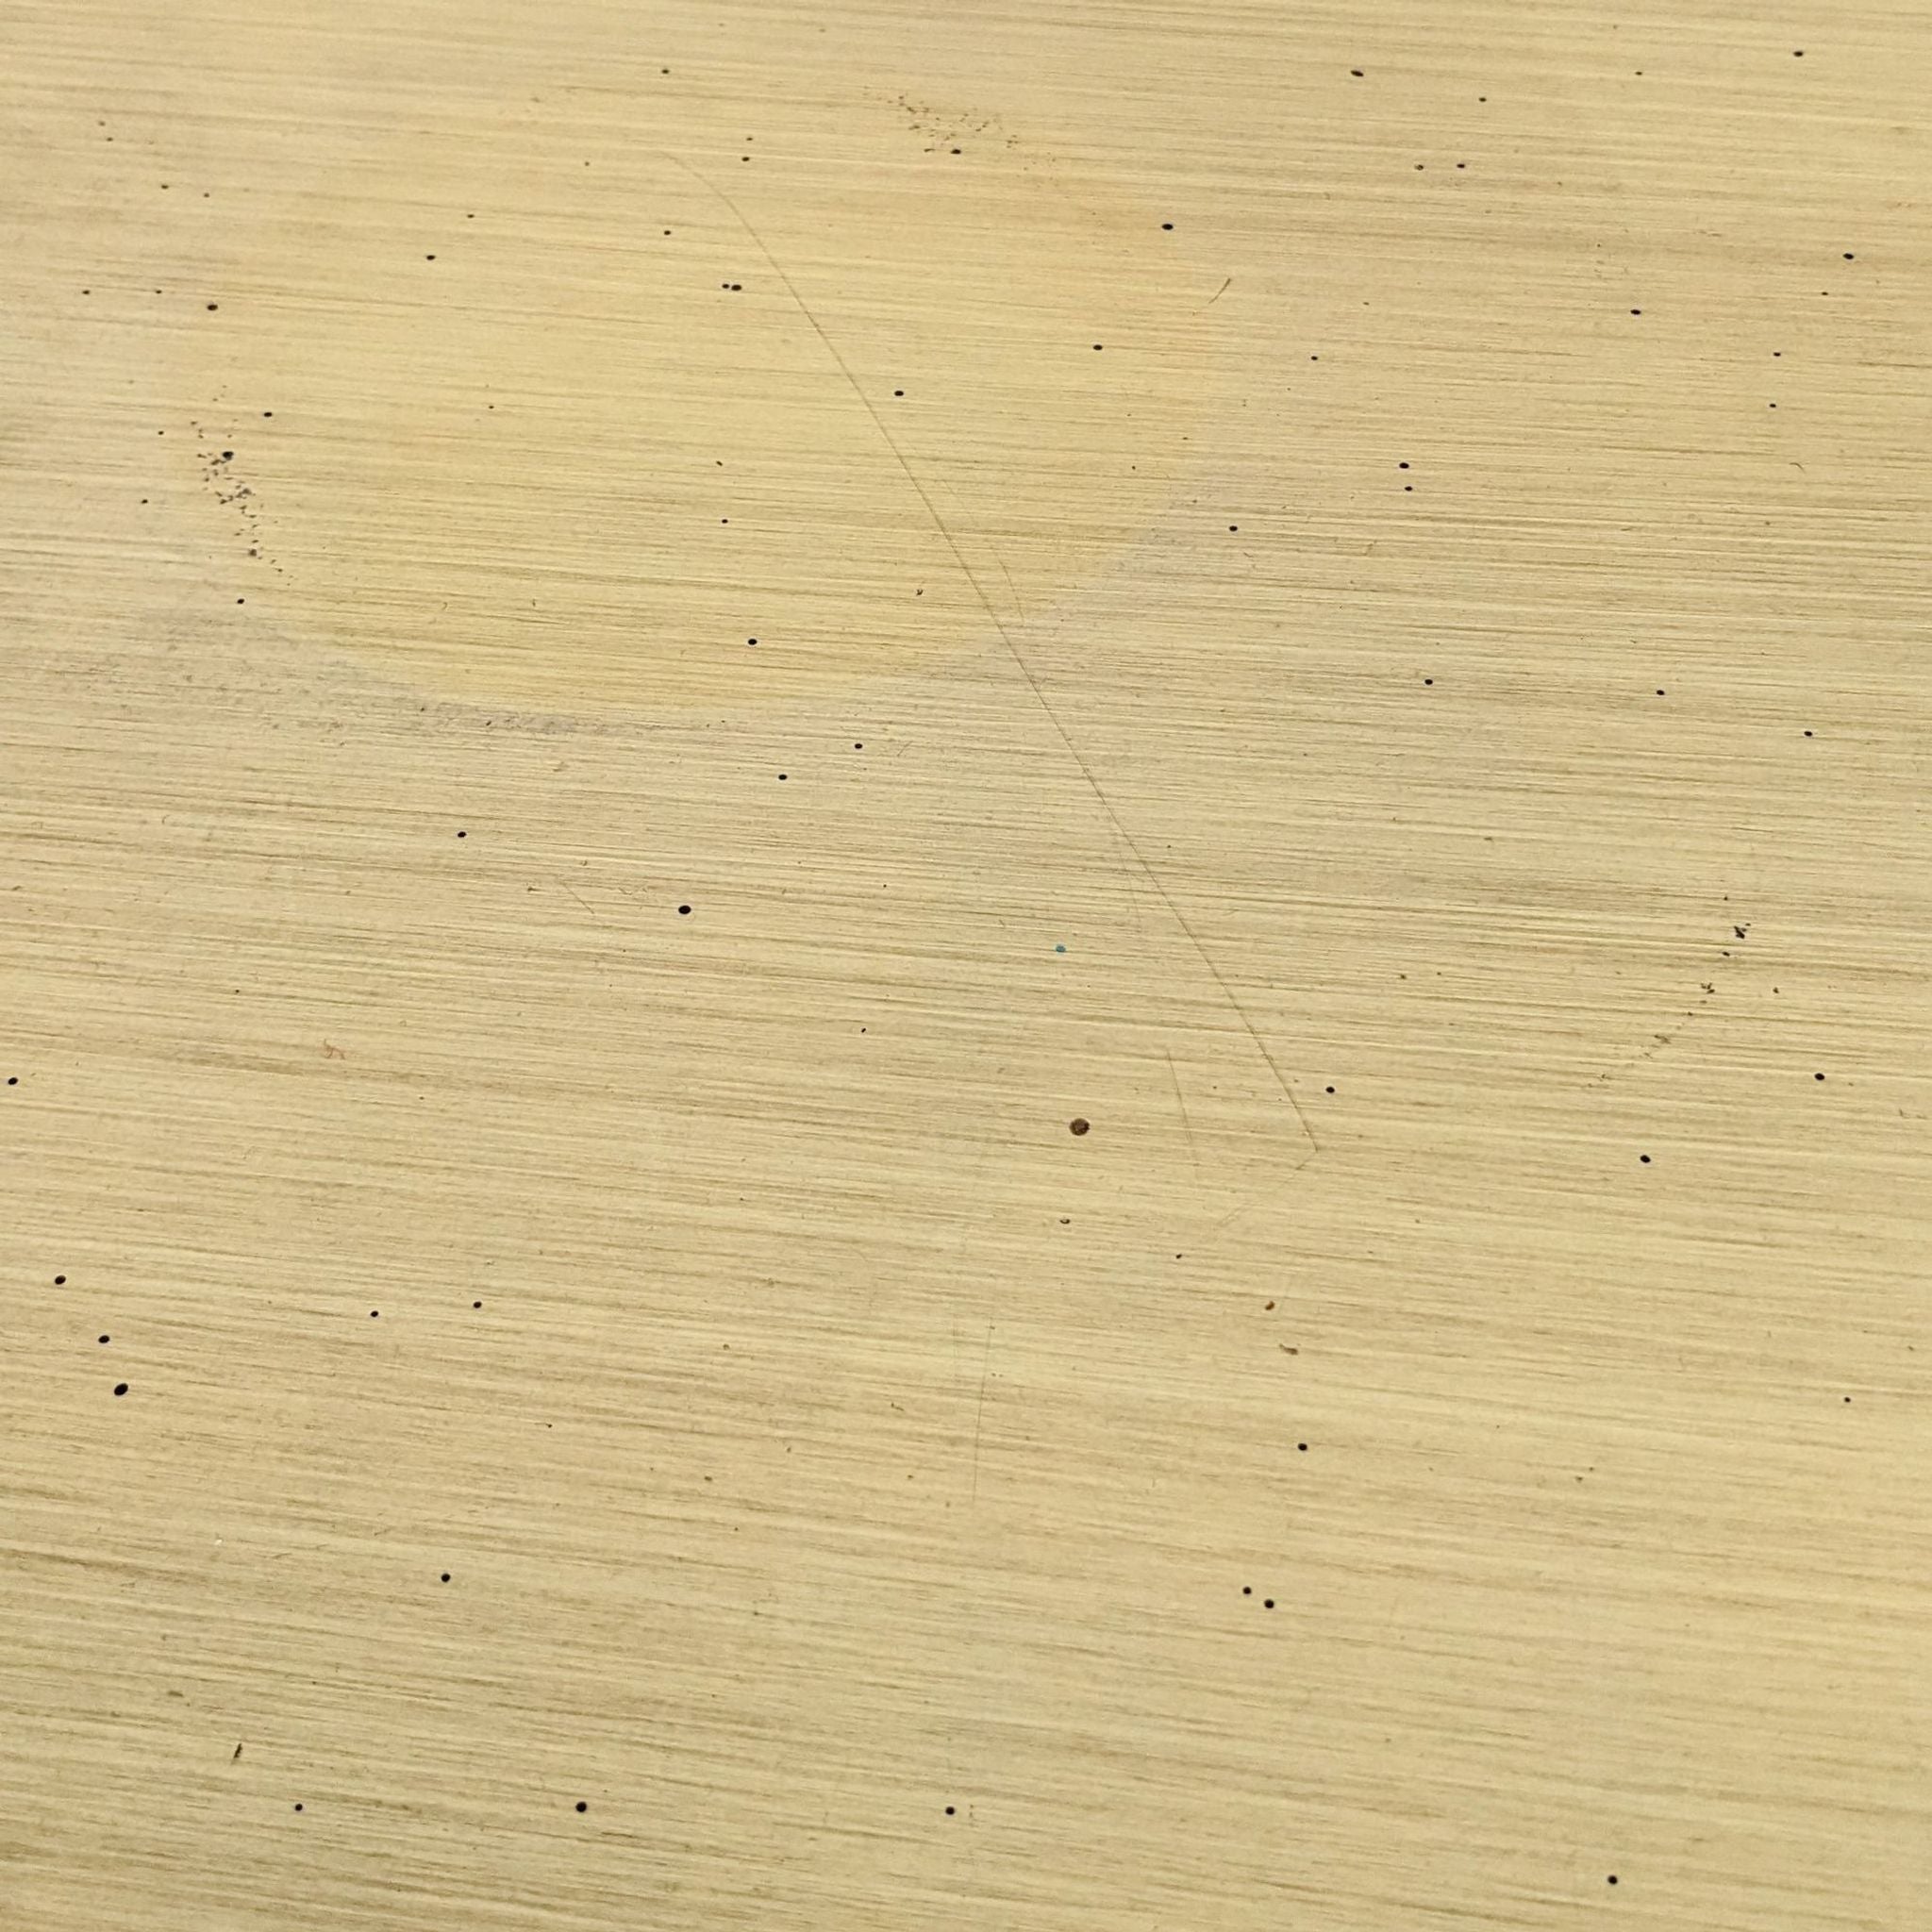 Close-up texture of a Reperch brand end table surface with small black speckles and subtle scratches.